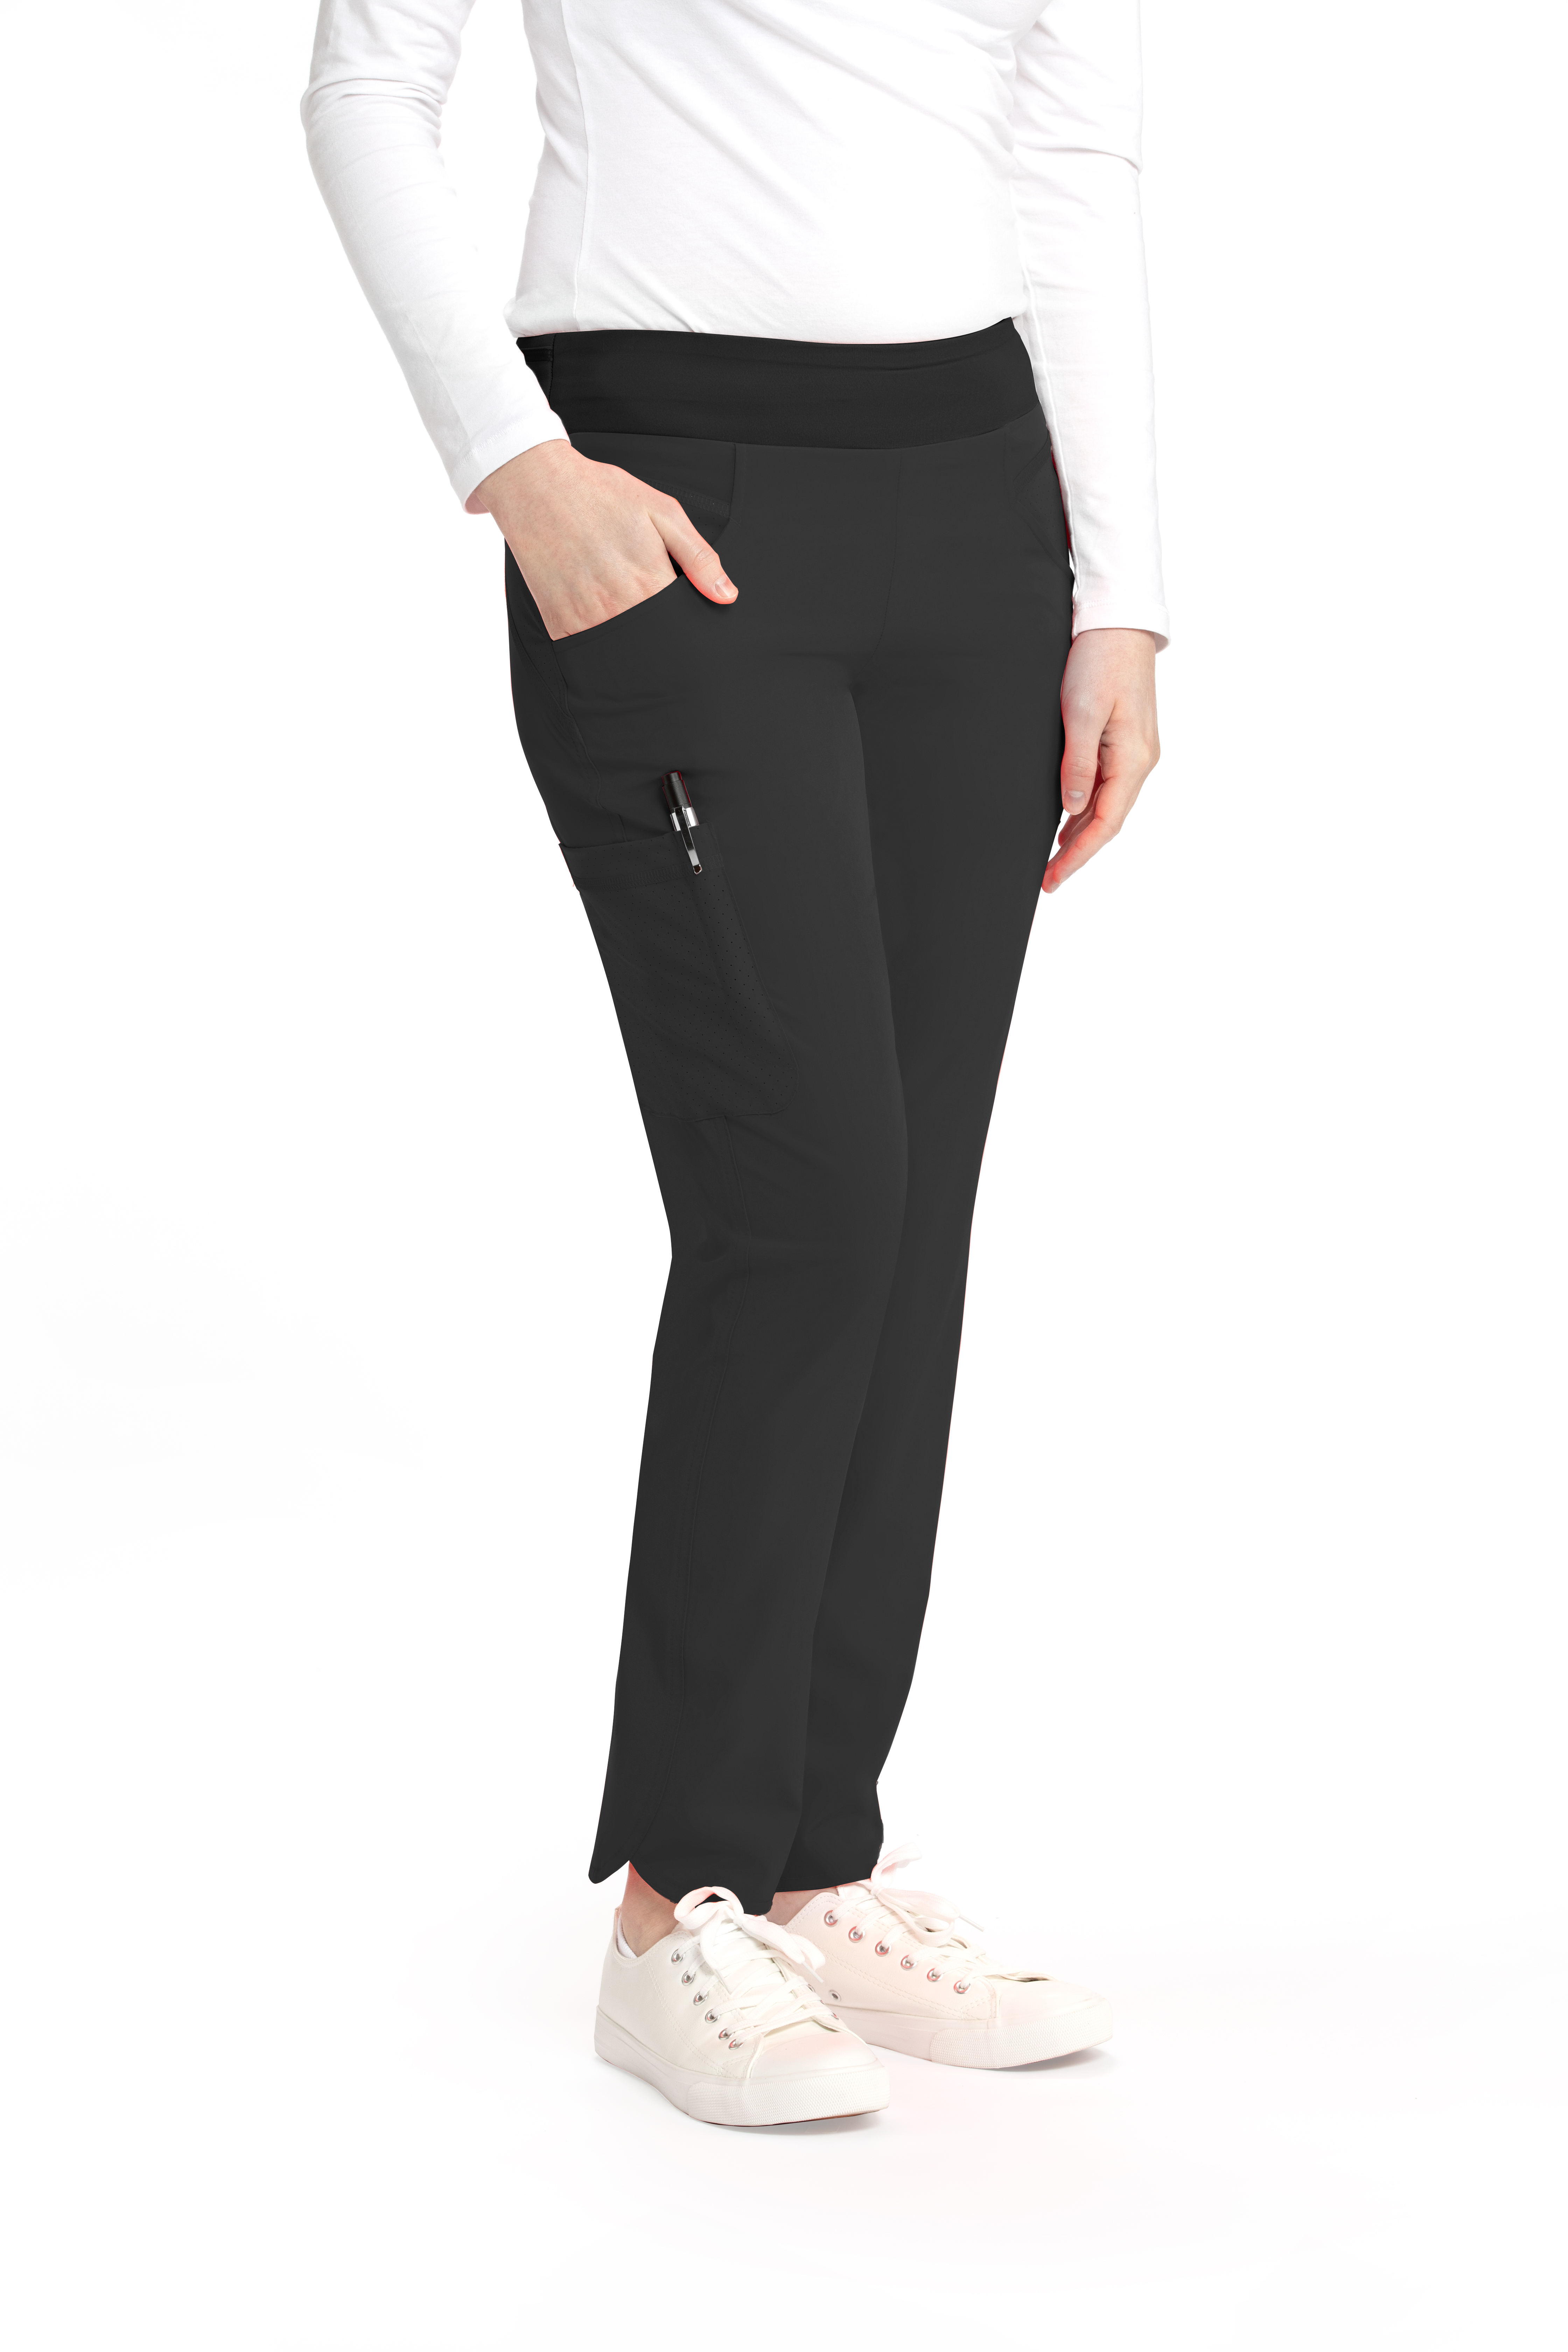 Barco One Spark Pant-